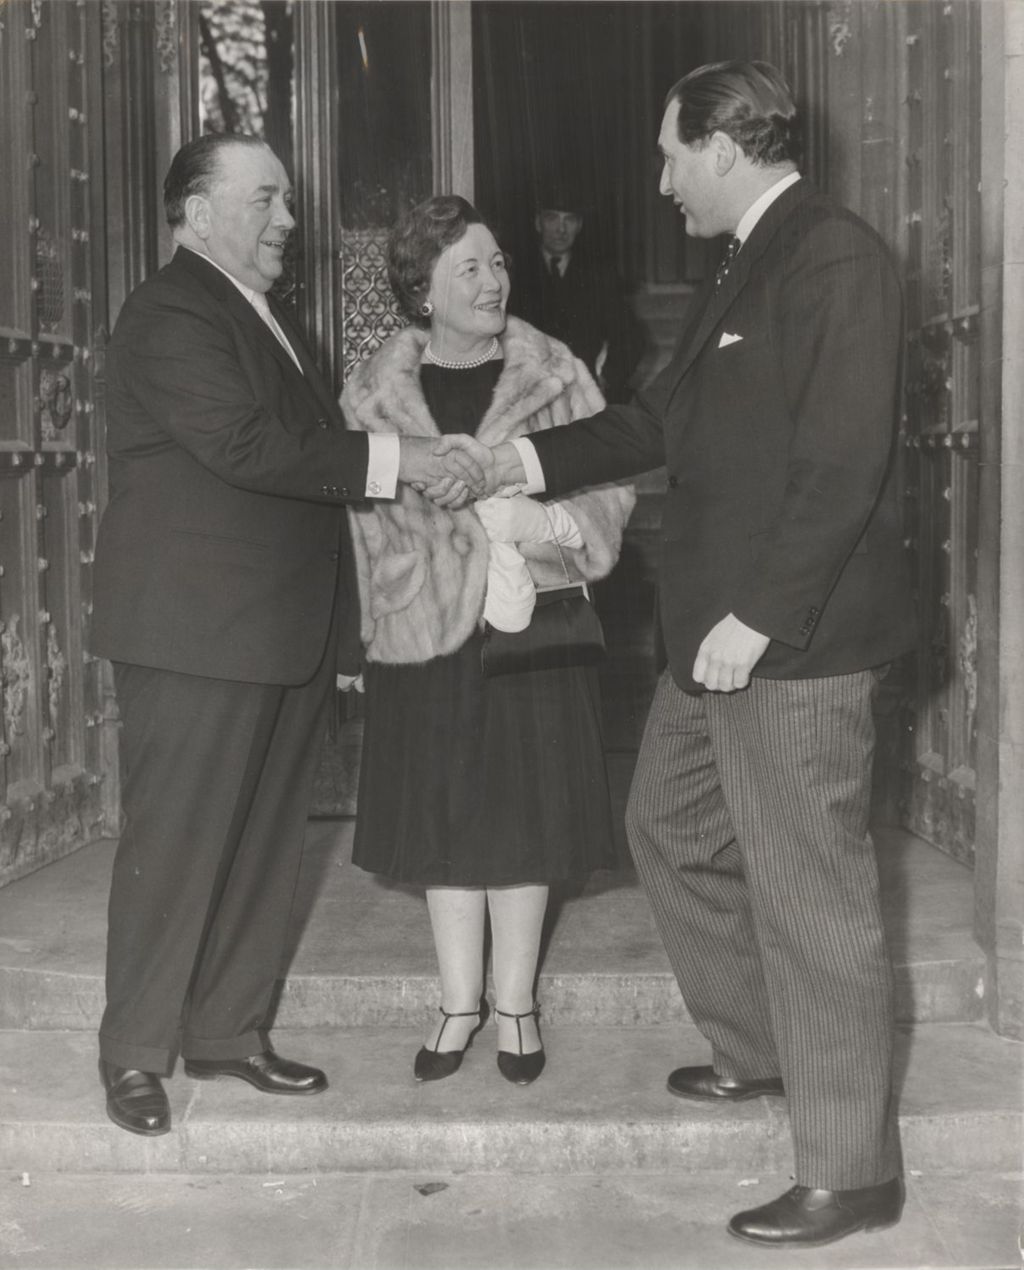 Miniature of Richard J. and Eleanor Daley greet a member of Parliament at the House of Commons in London